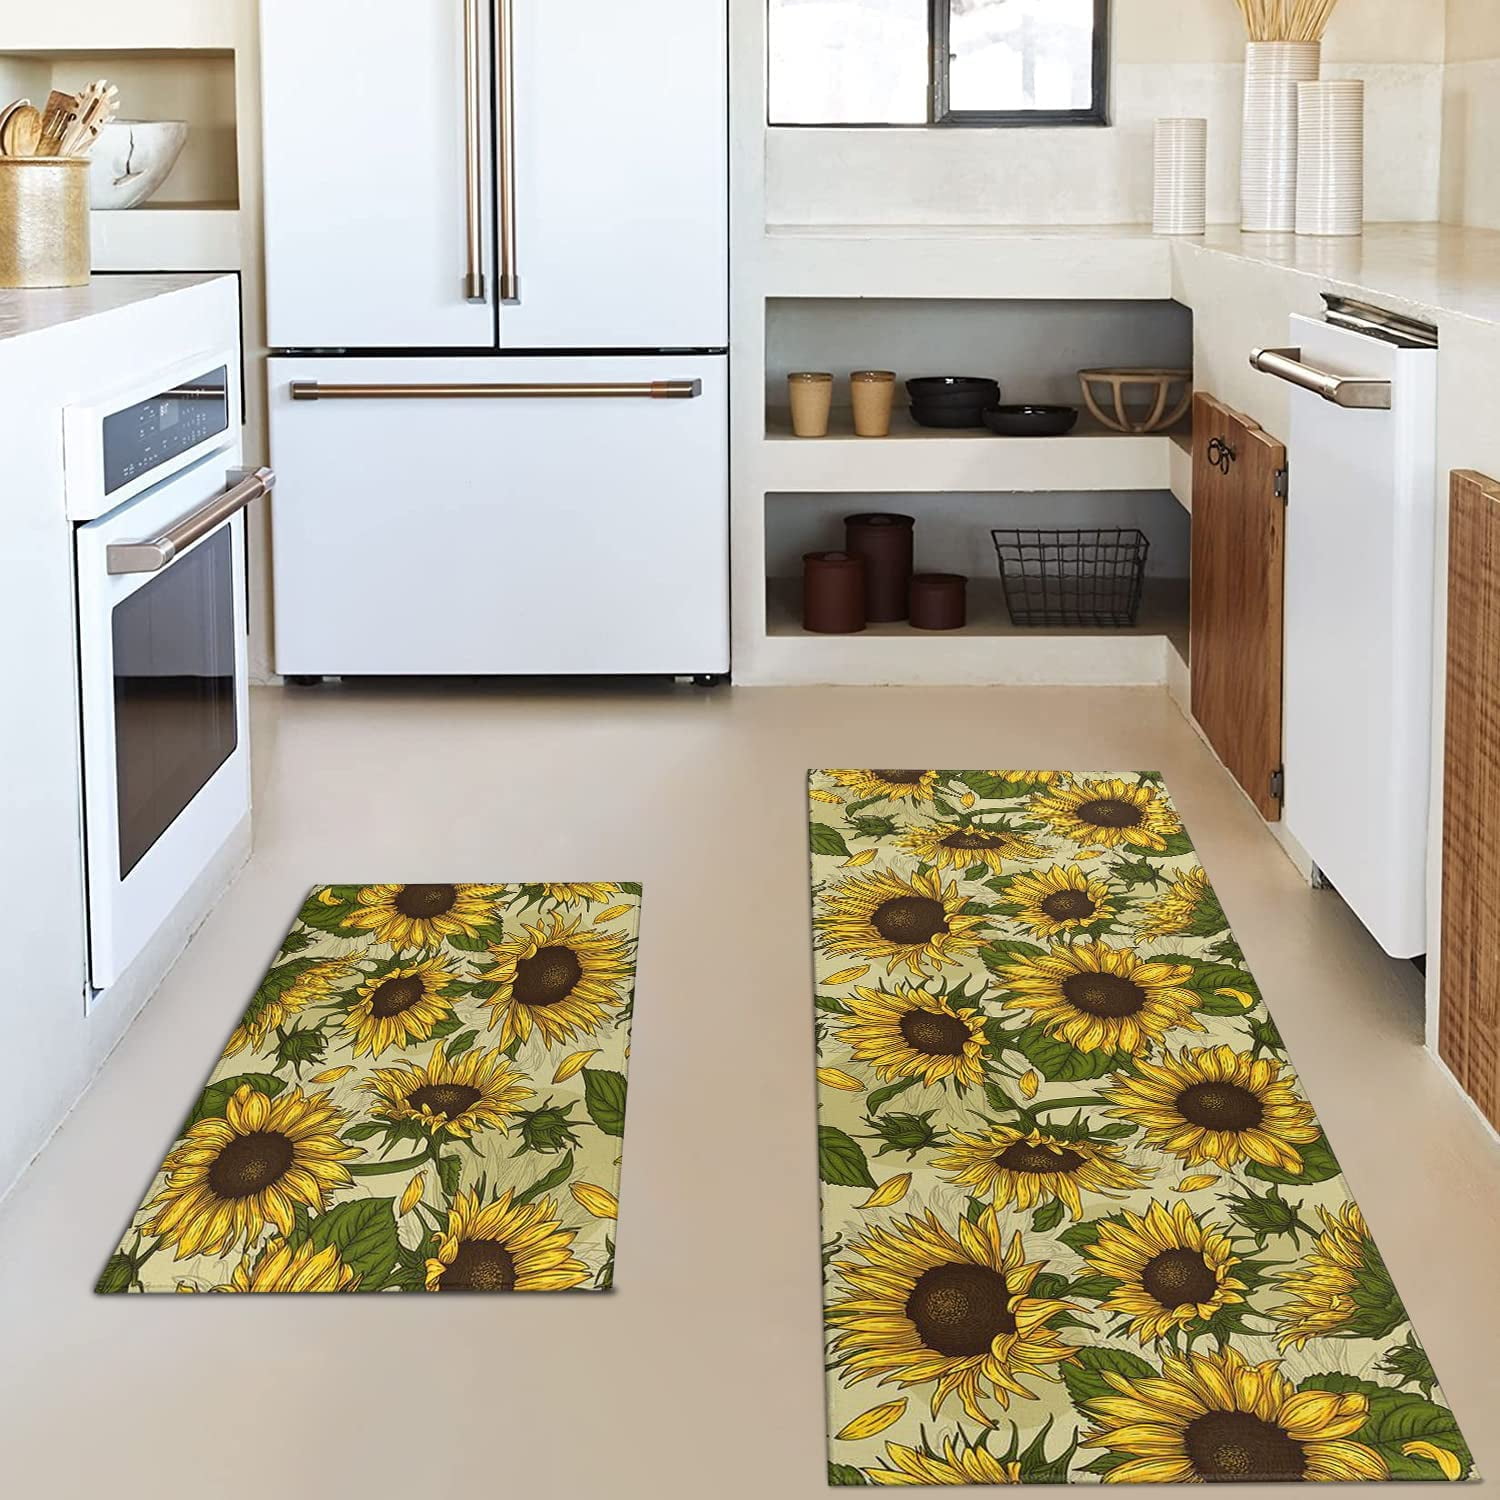  Kitchen Mat 2 Pieces, Sweet Honey Sunflower Bees Gnomes On Car  Vintage Kitchen Rugs and Mats Non Slip Runner Rug Washable Floor Mats for  Kitchen Home 19.7 x 31.5 + 19.7